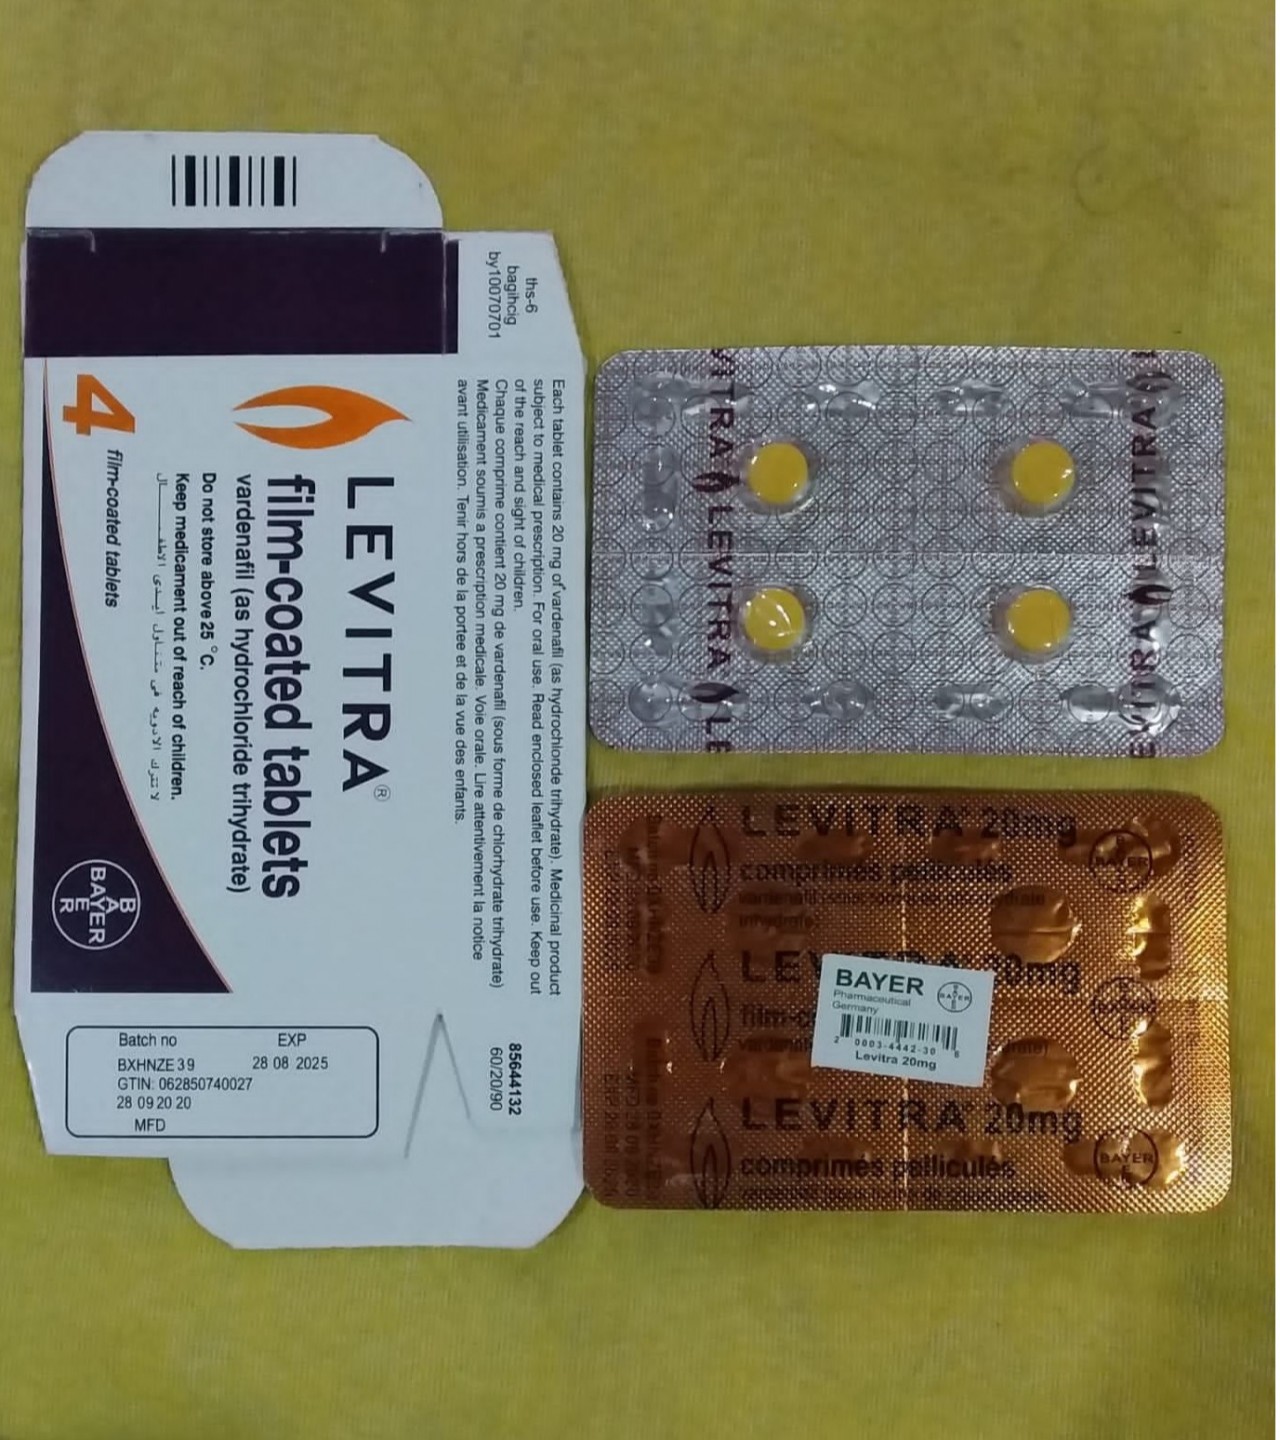 Levitra 20mg 4 Tablets Made In Germany